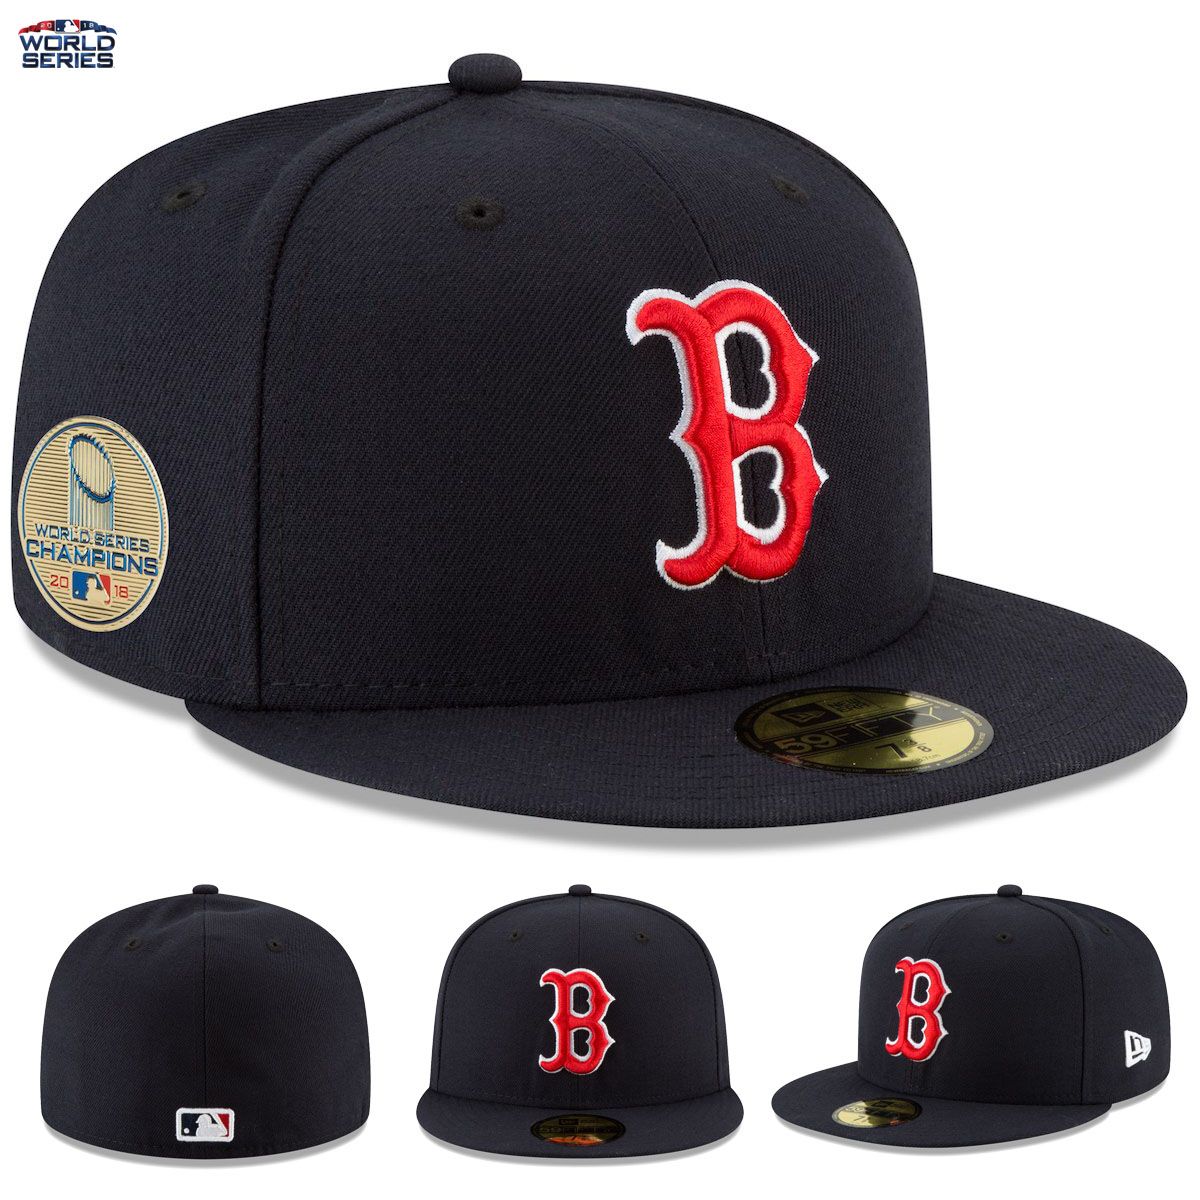 red sox 2018 world series champions hat